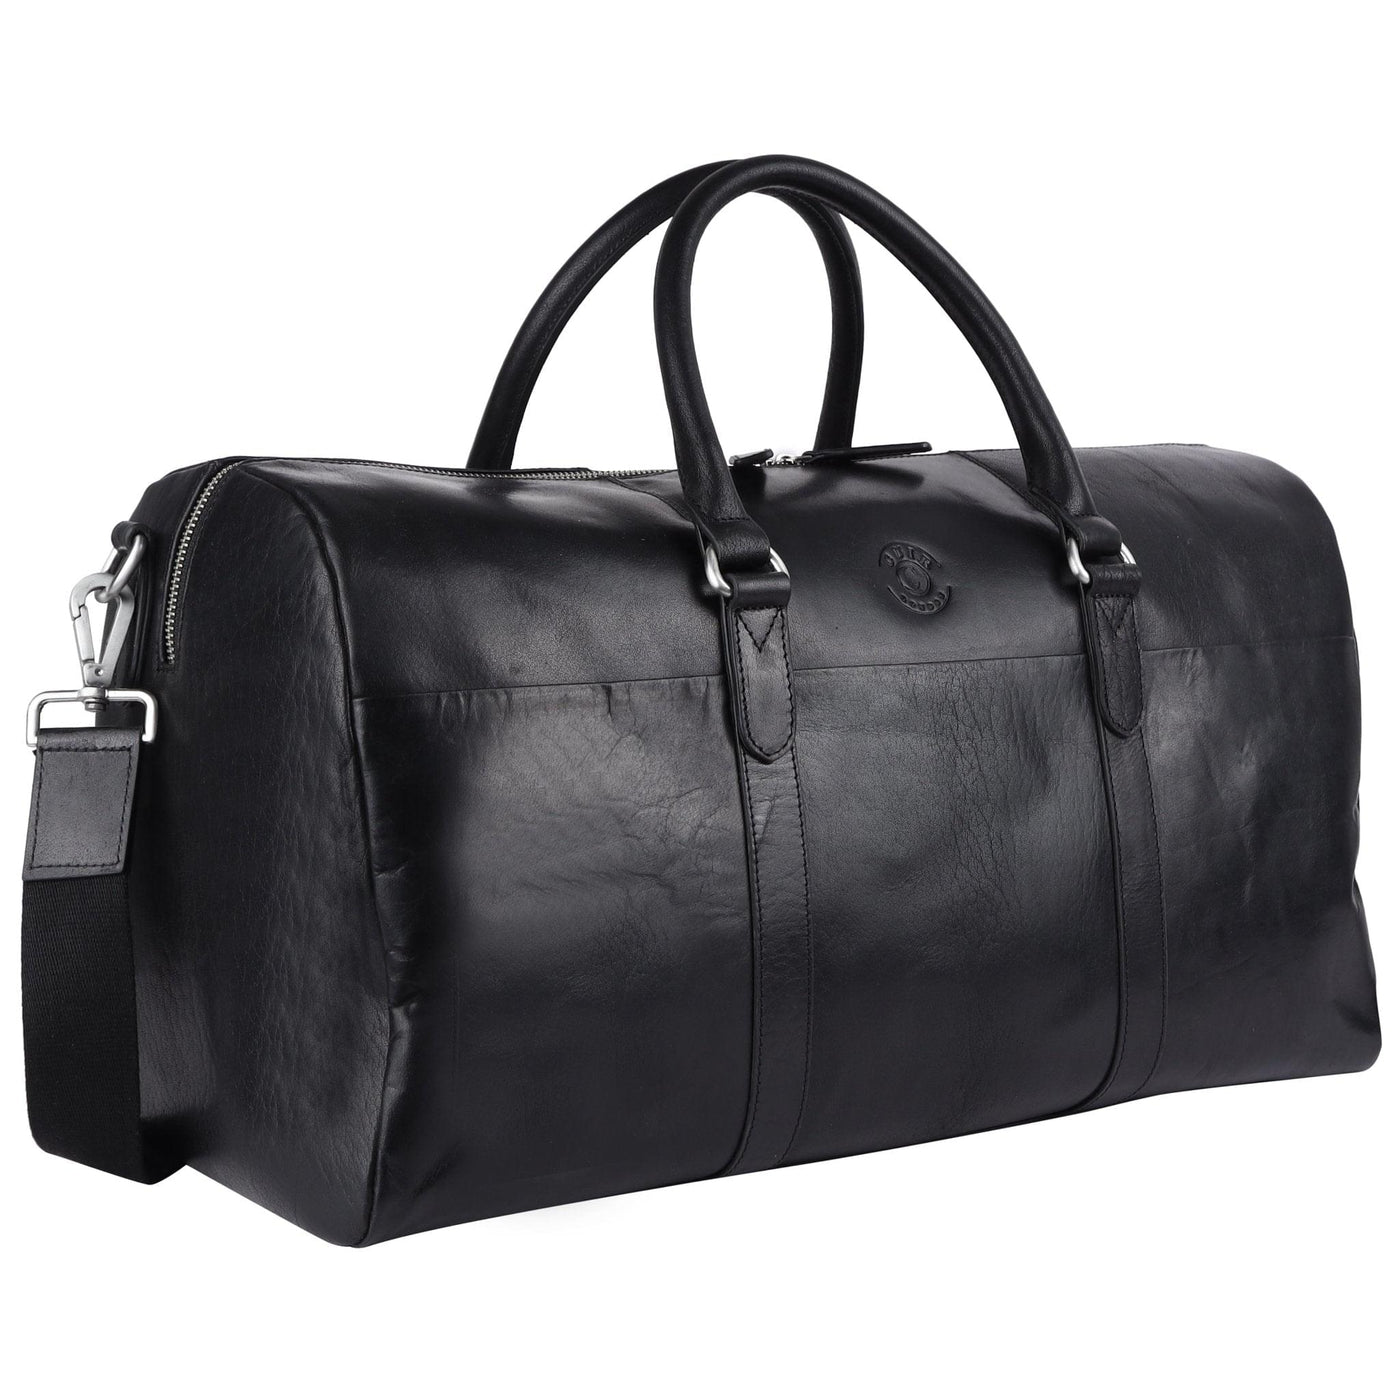 The Duffle GYM Weekend Travel Bag